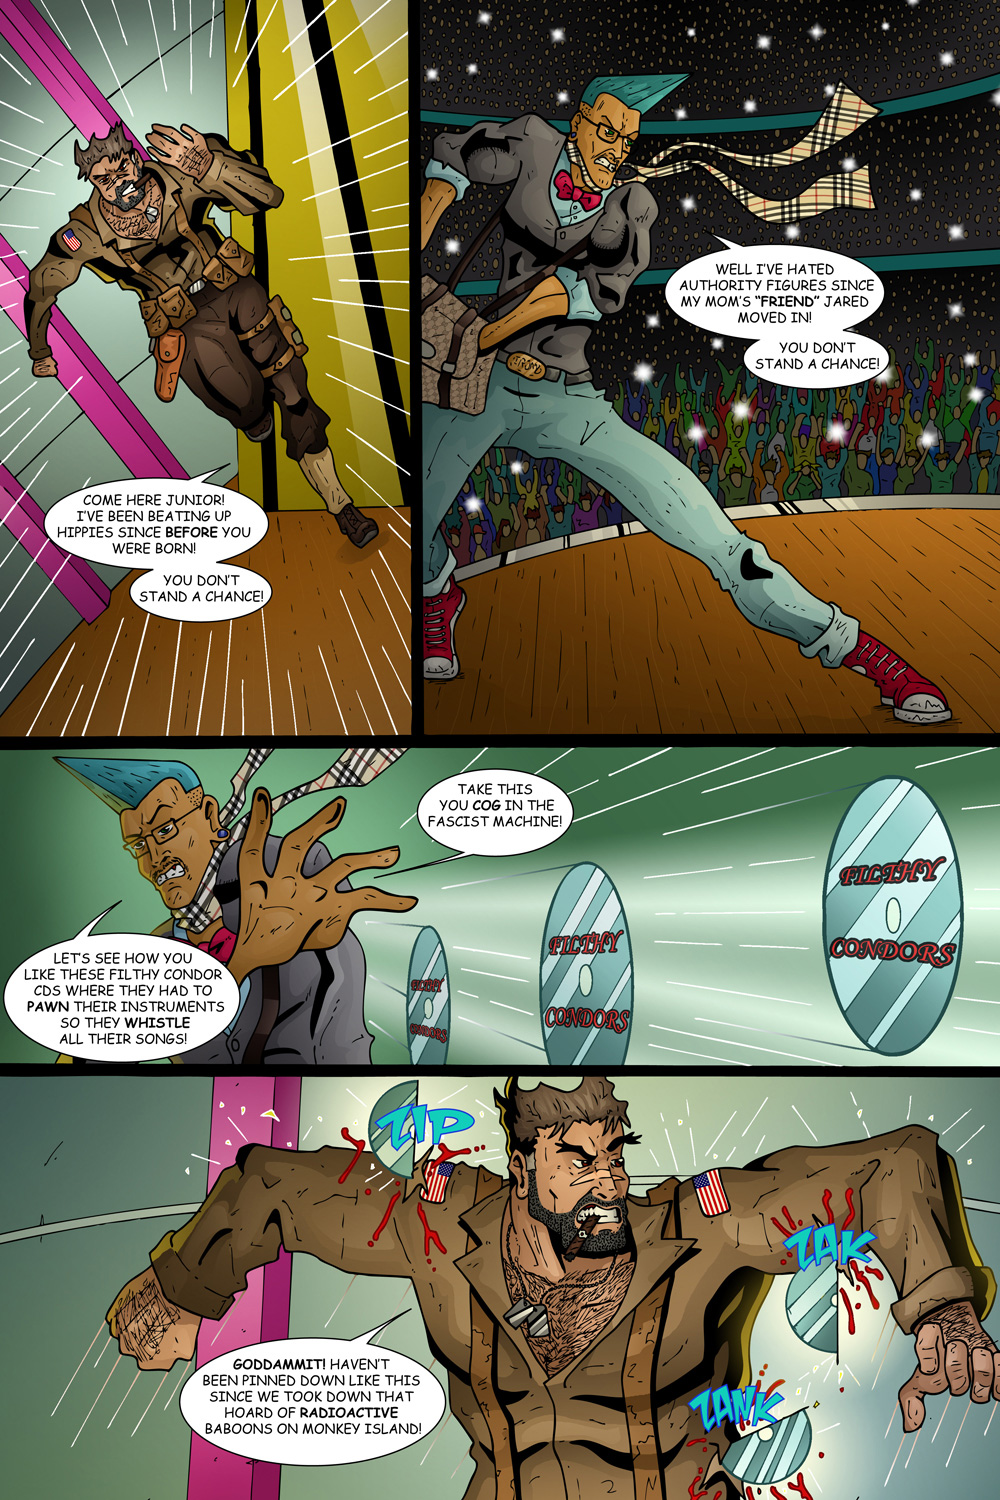 MISSION 004: PAGE 10 “RADIOACTIVE BABOONS”